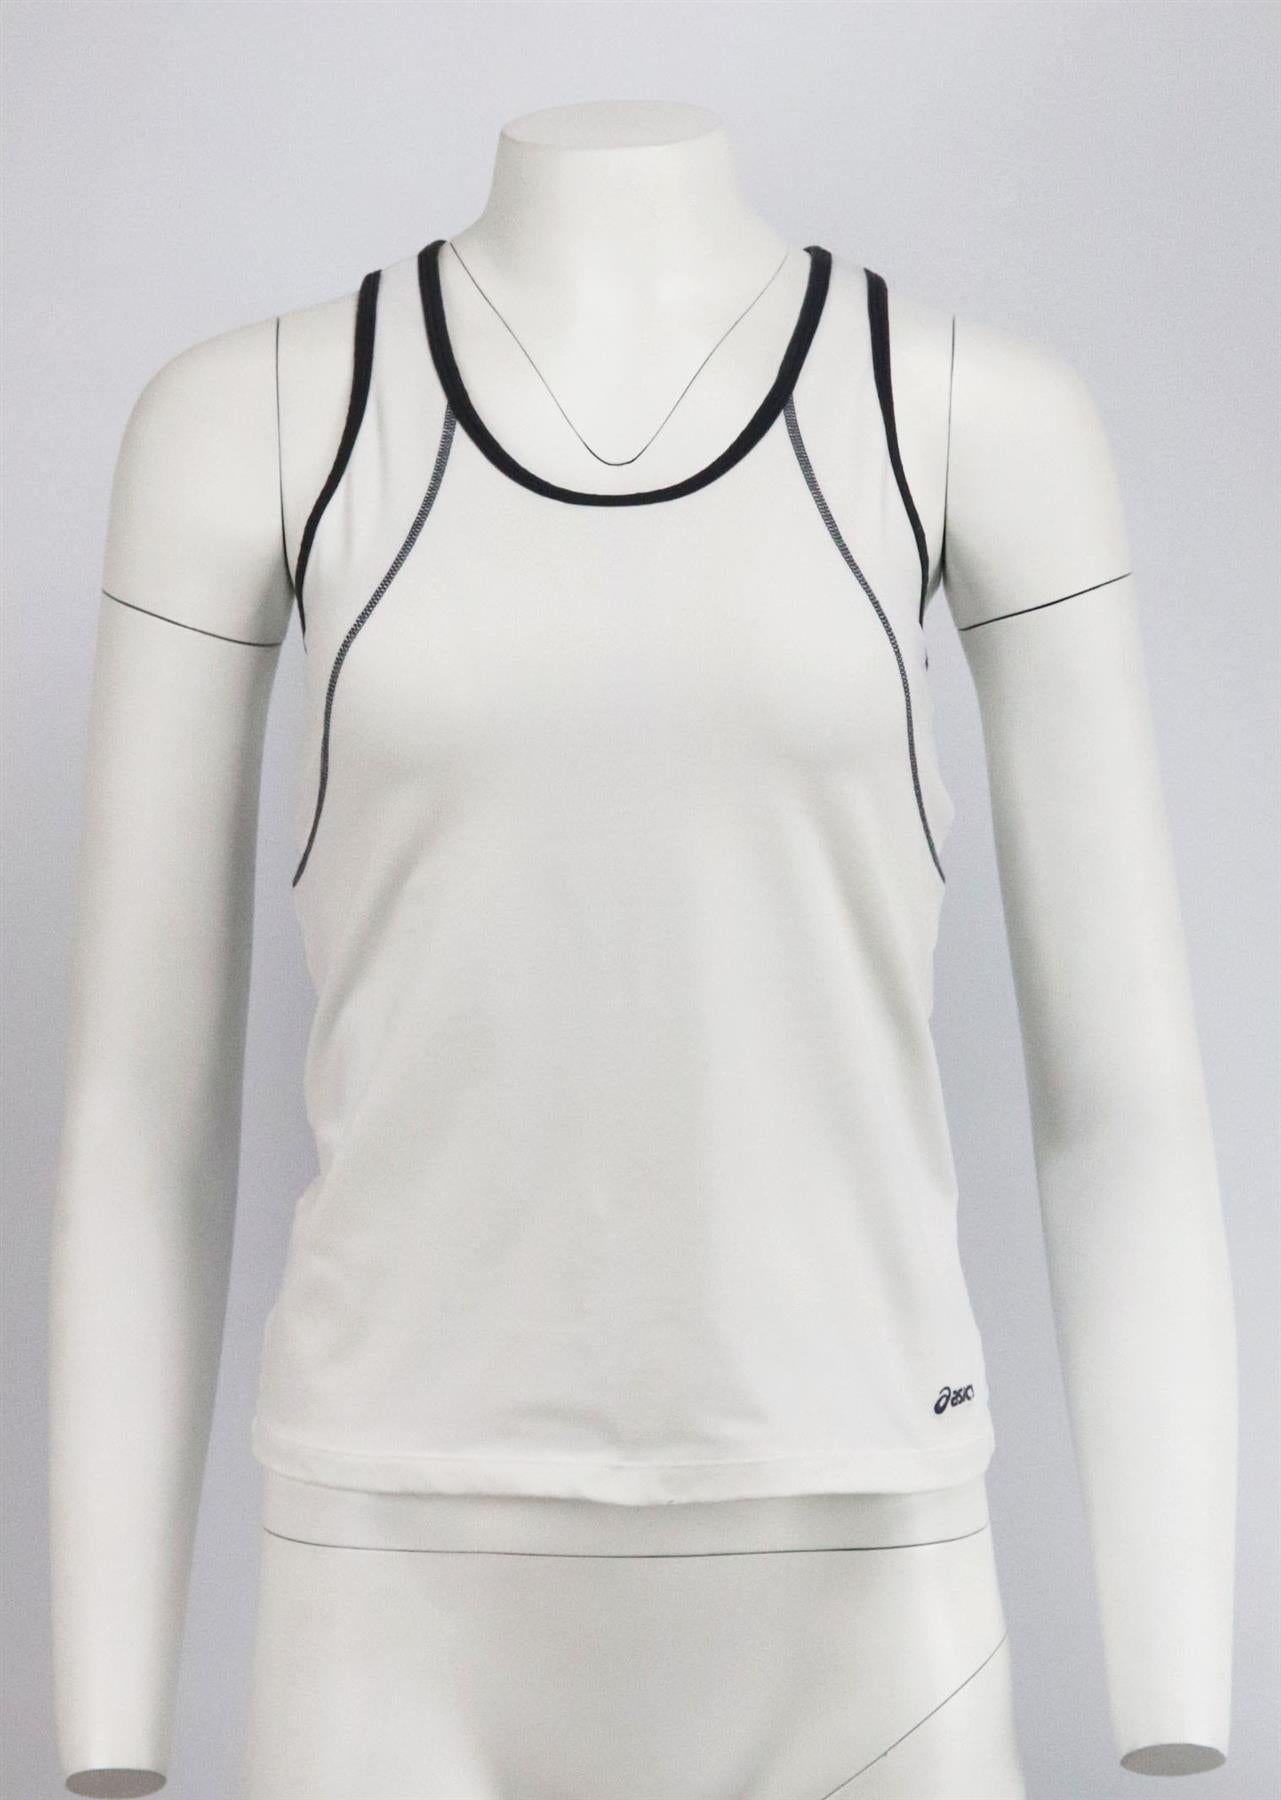 ASICS STRETCH JERSEY TOP LARGE